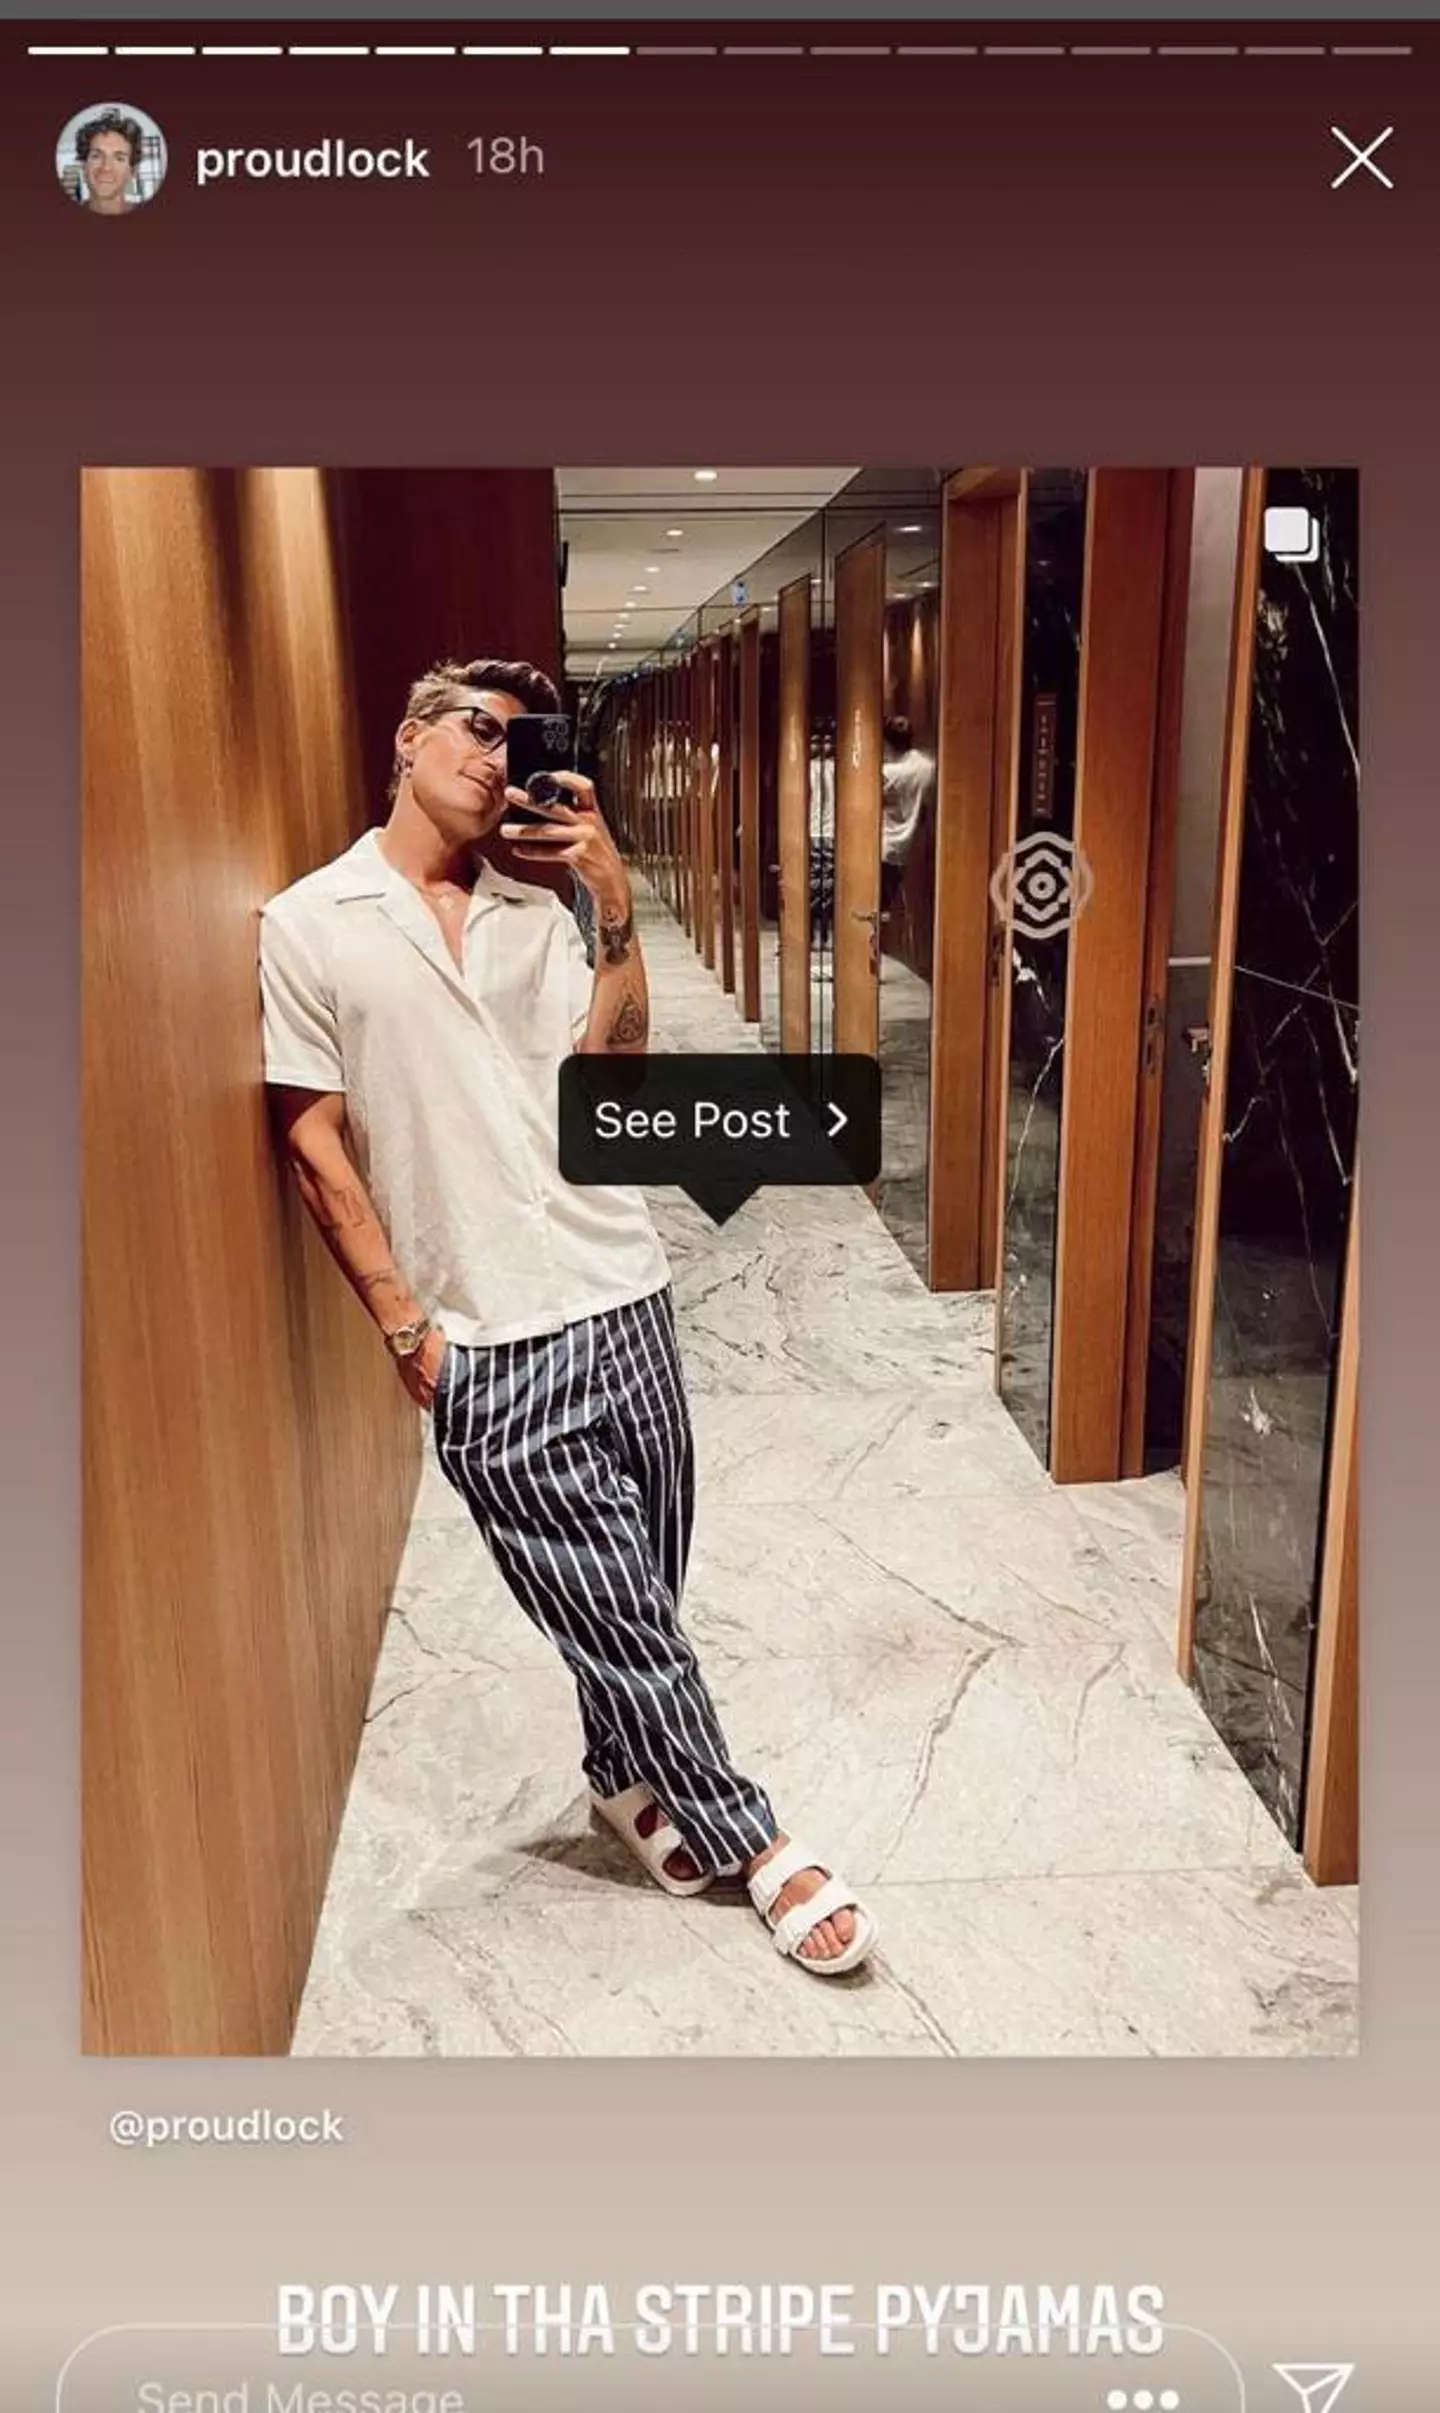 Proudlock's caption prompted outcry (